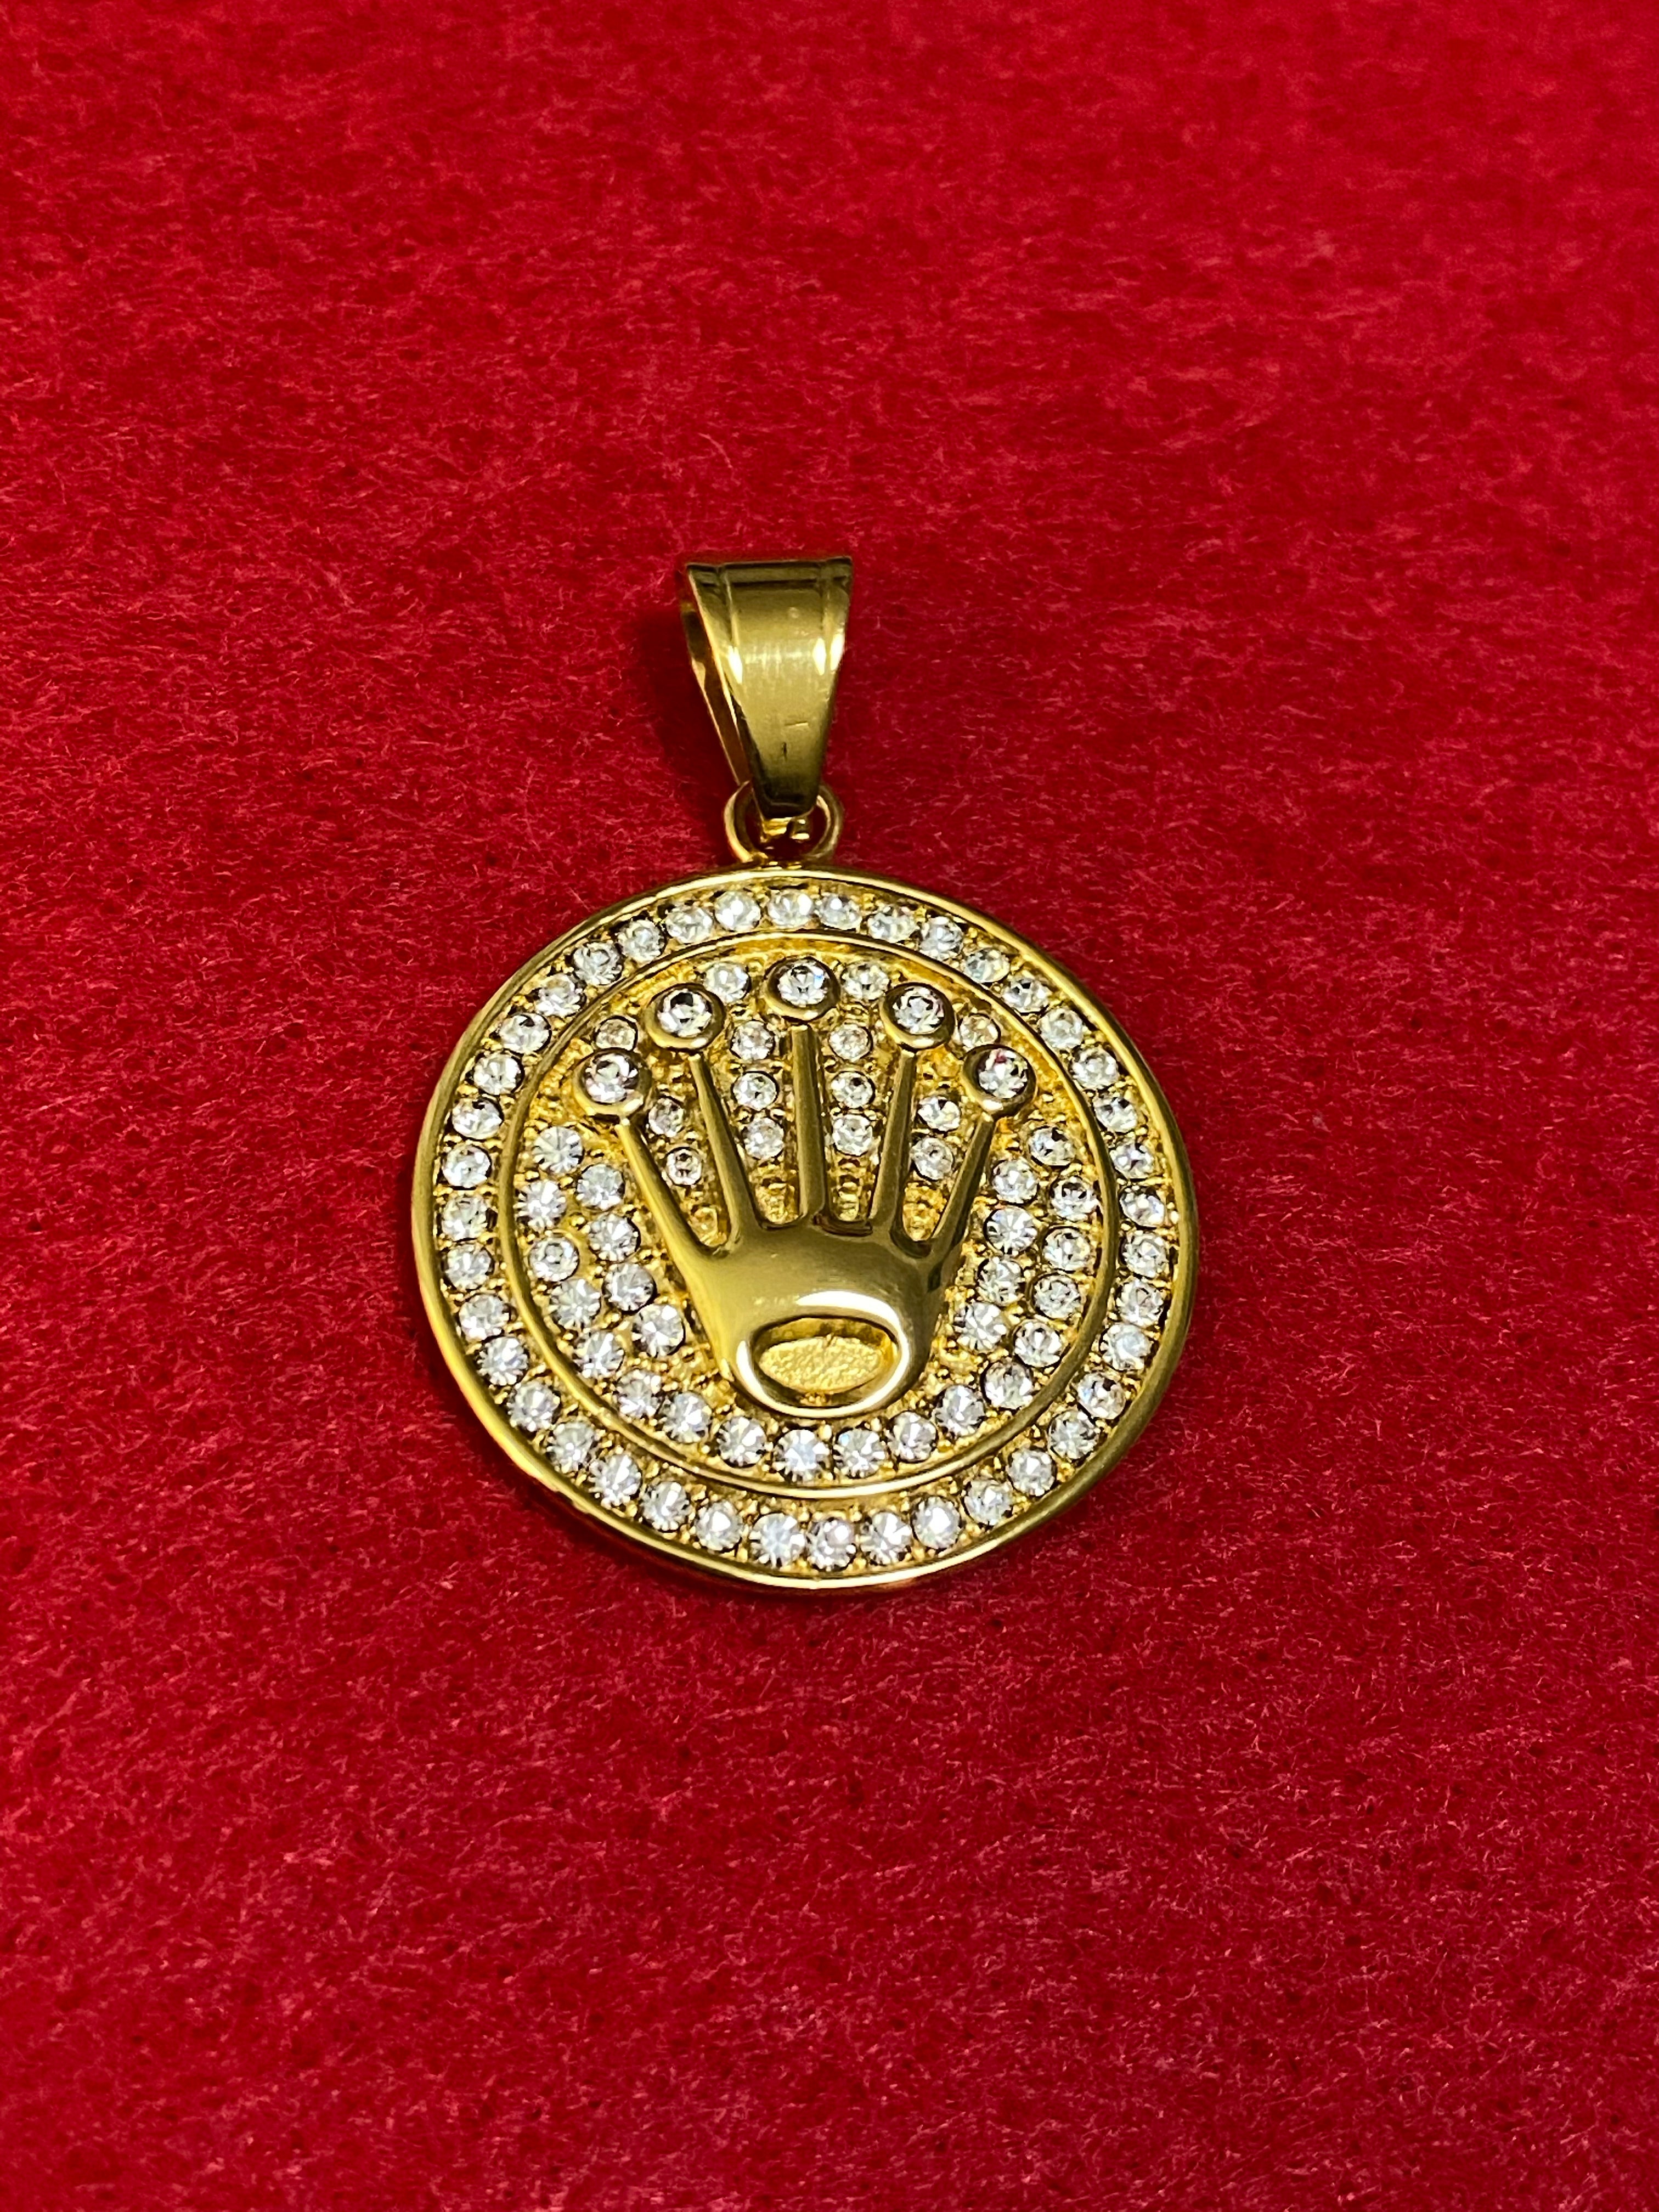 Crown pendant and chain